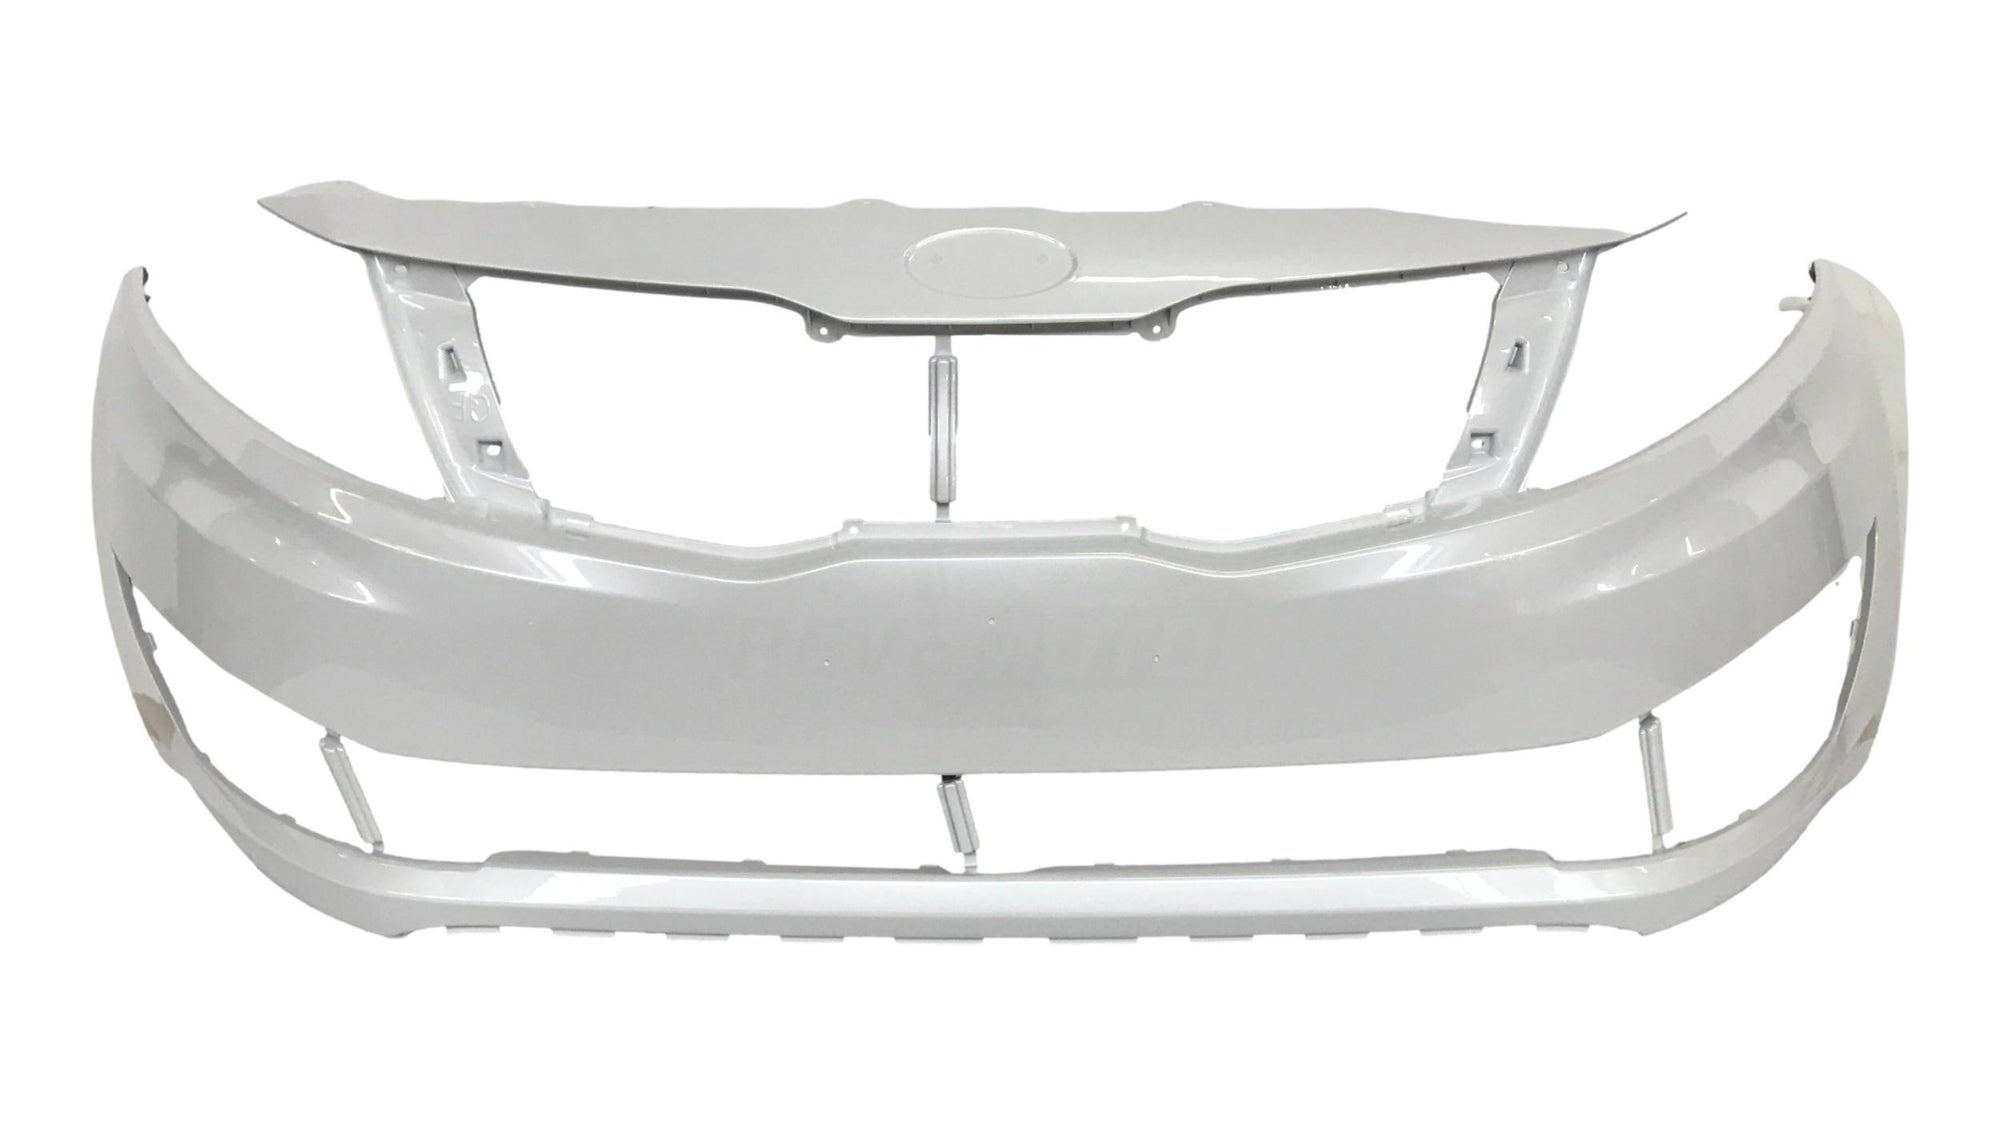 2012-2013 Kia Optima Front Bumper Painted USA Built; EX/LX Models | WITHOUT- Tow Hook Hole (Except SX Model) Snow White Pearl (SWP) 865114C000 KI1000161